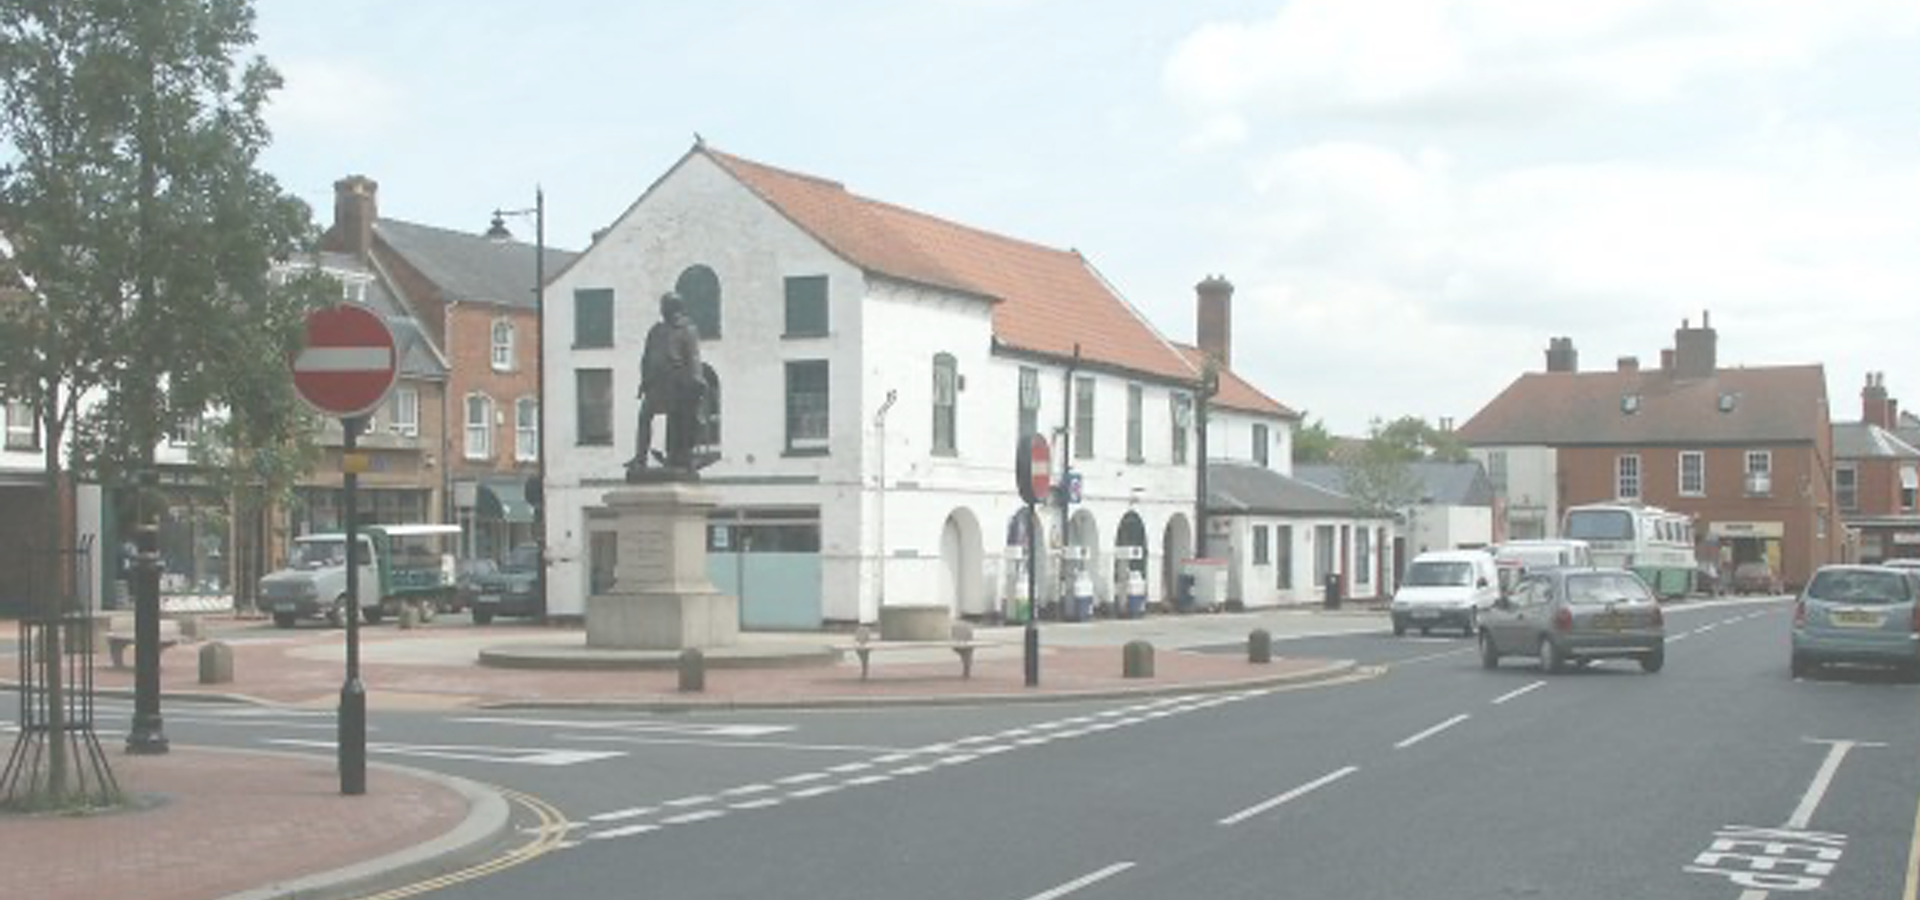 <b>Spilsby, Lincolnshire, England, Great Britain</b>